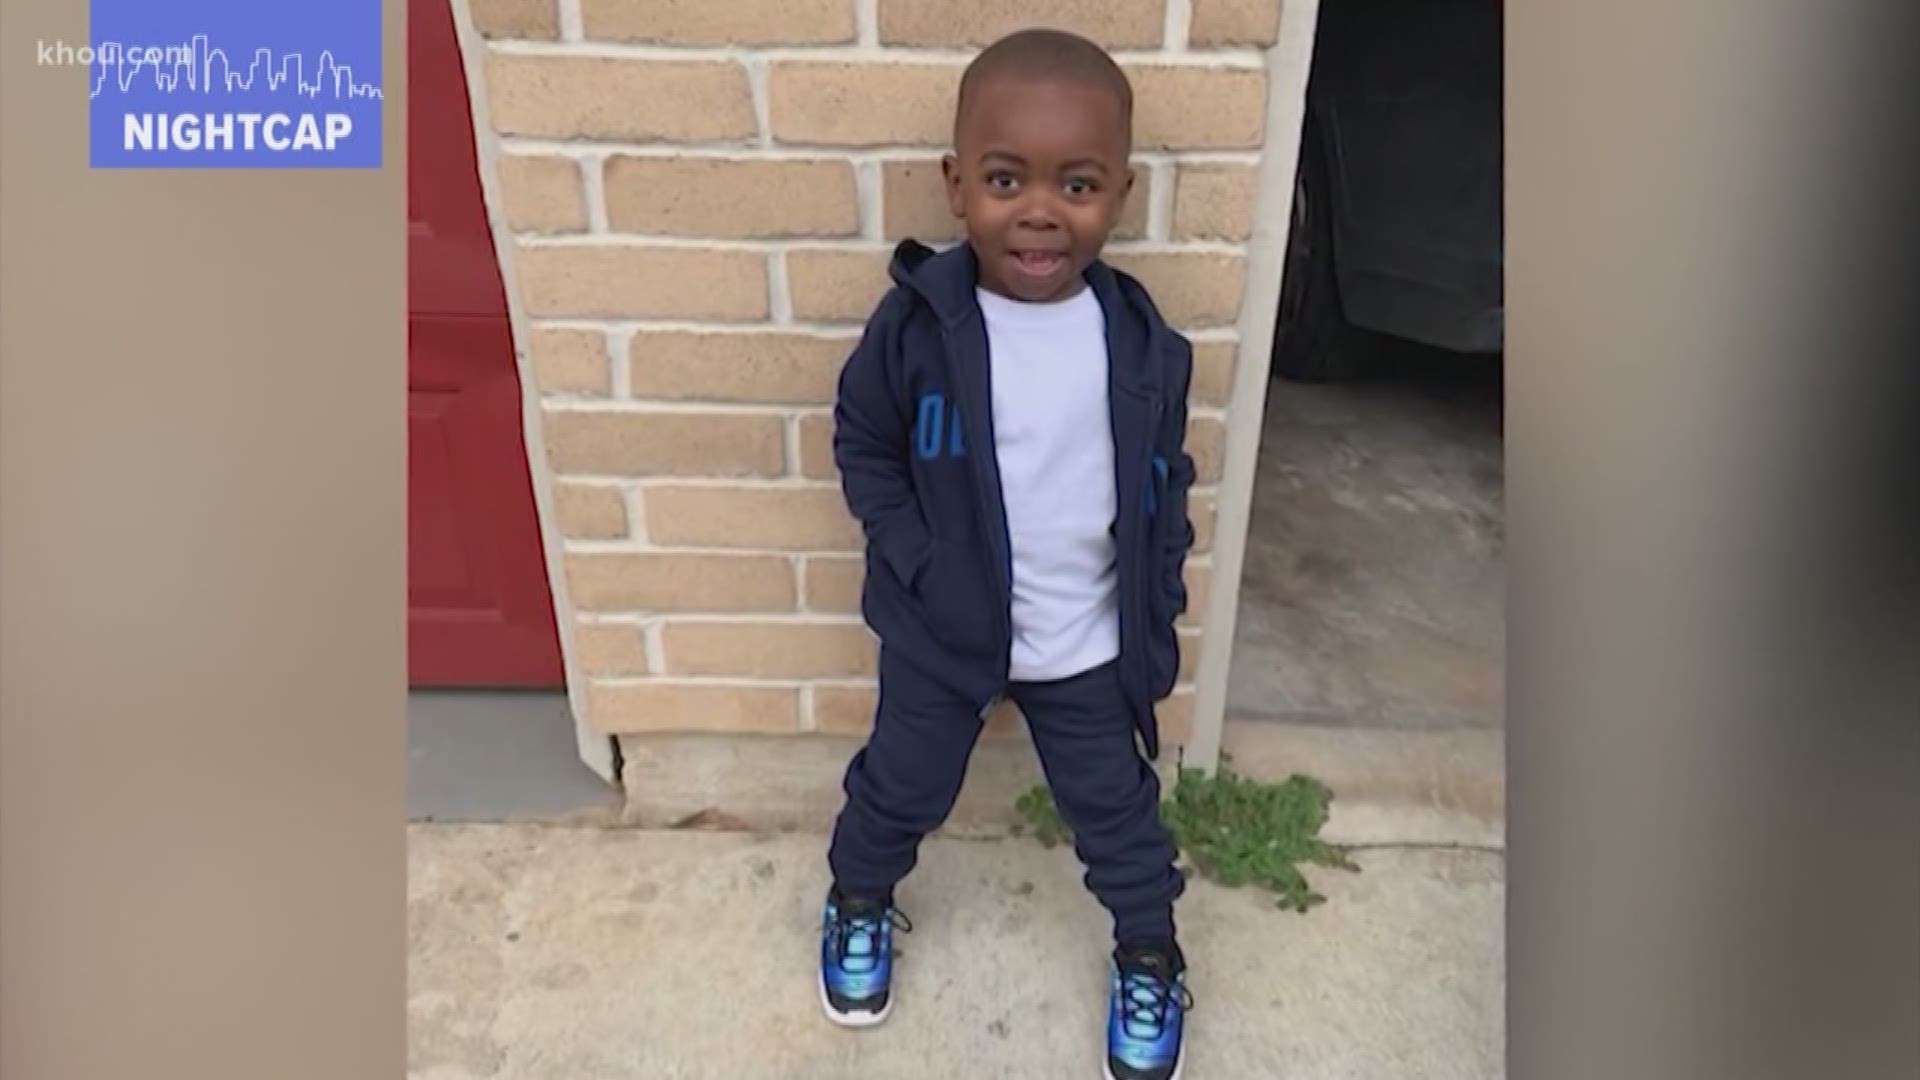 A 2-year-old boy was killed in his family's garage. Deputies say Ivory West Jr., his father and another man were all shot just before midnight by two robbers. That tragic story kicks off this edition of the nightcap in 90 seconds.